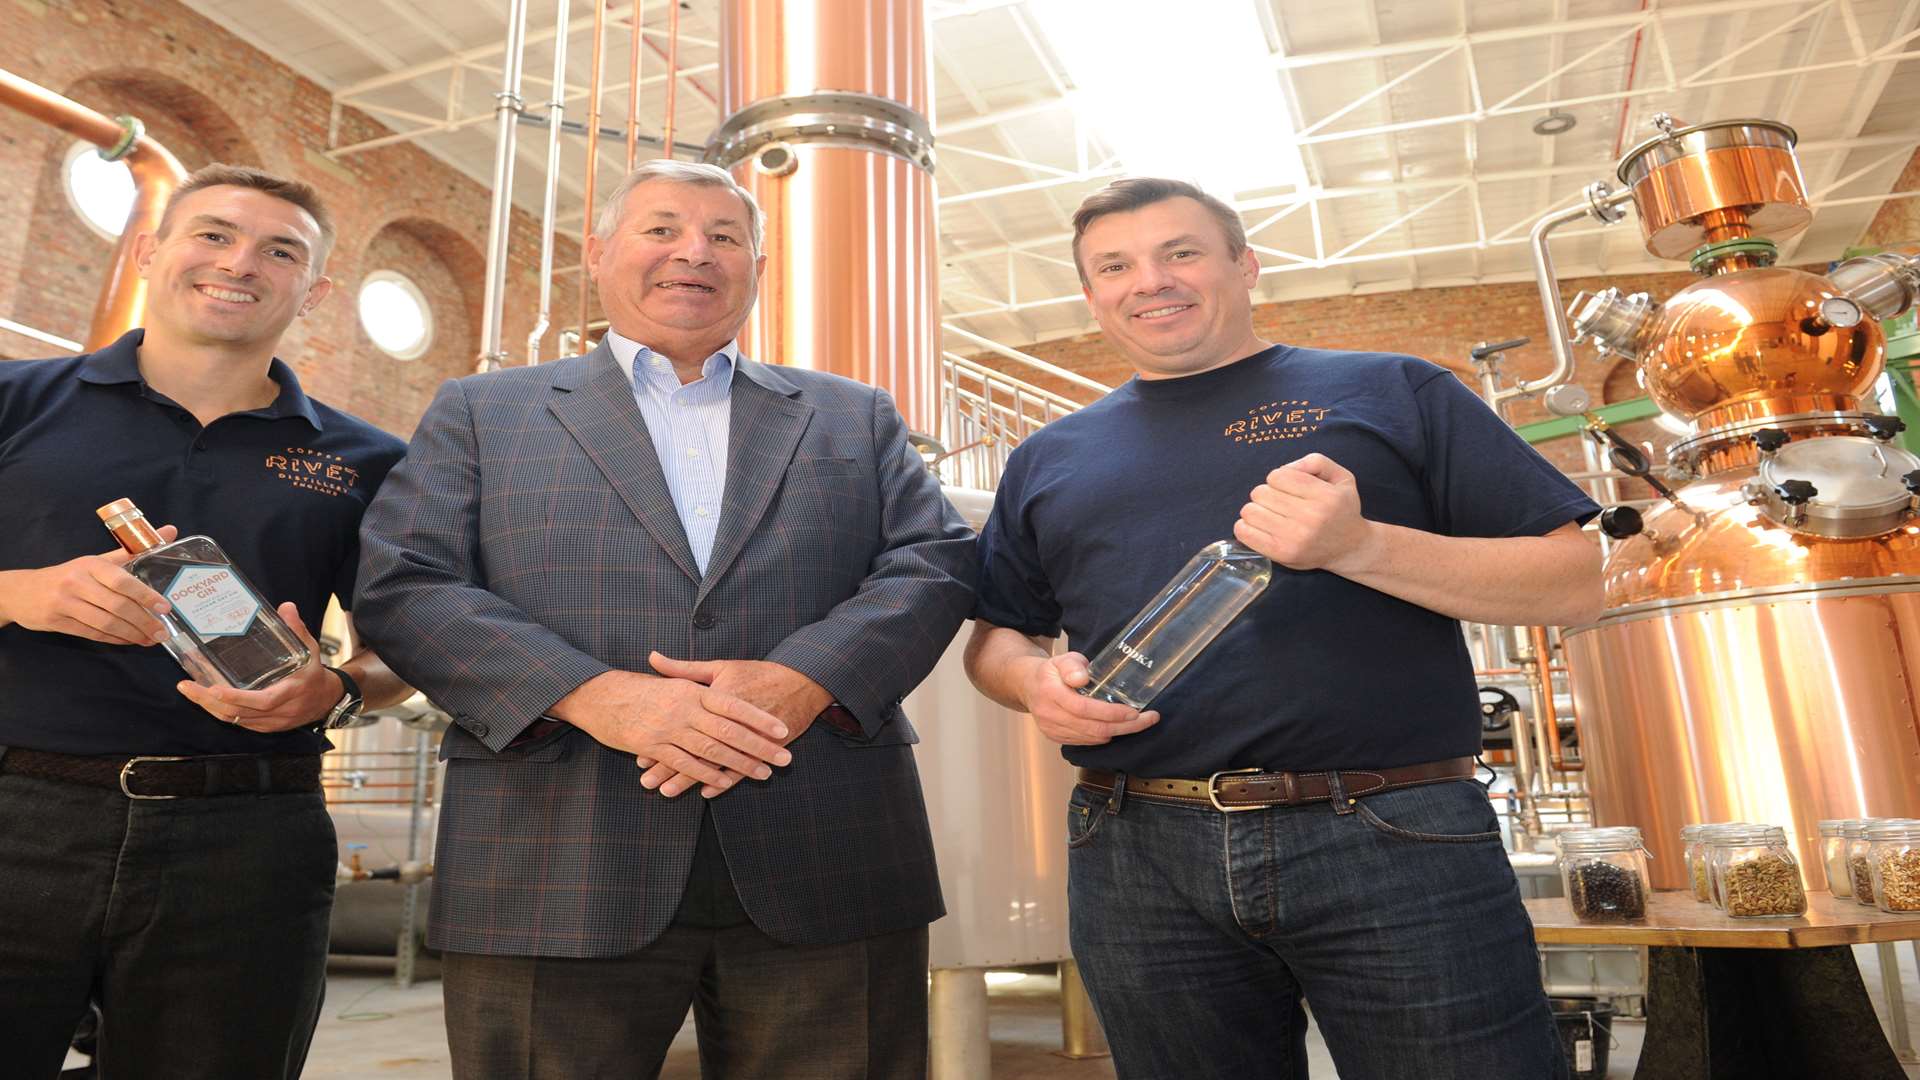 Stephen, Bob and Matthew Russell at the Copper Rivet Distillery